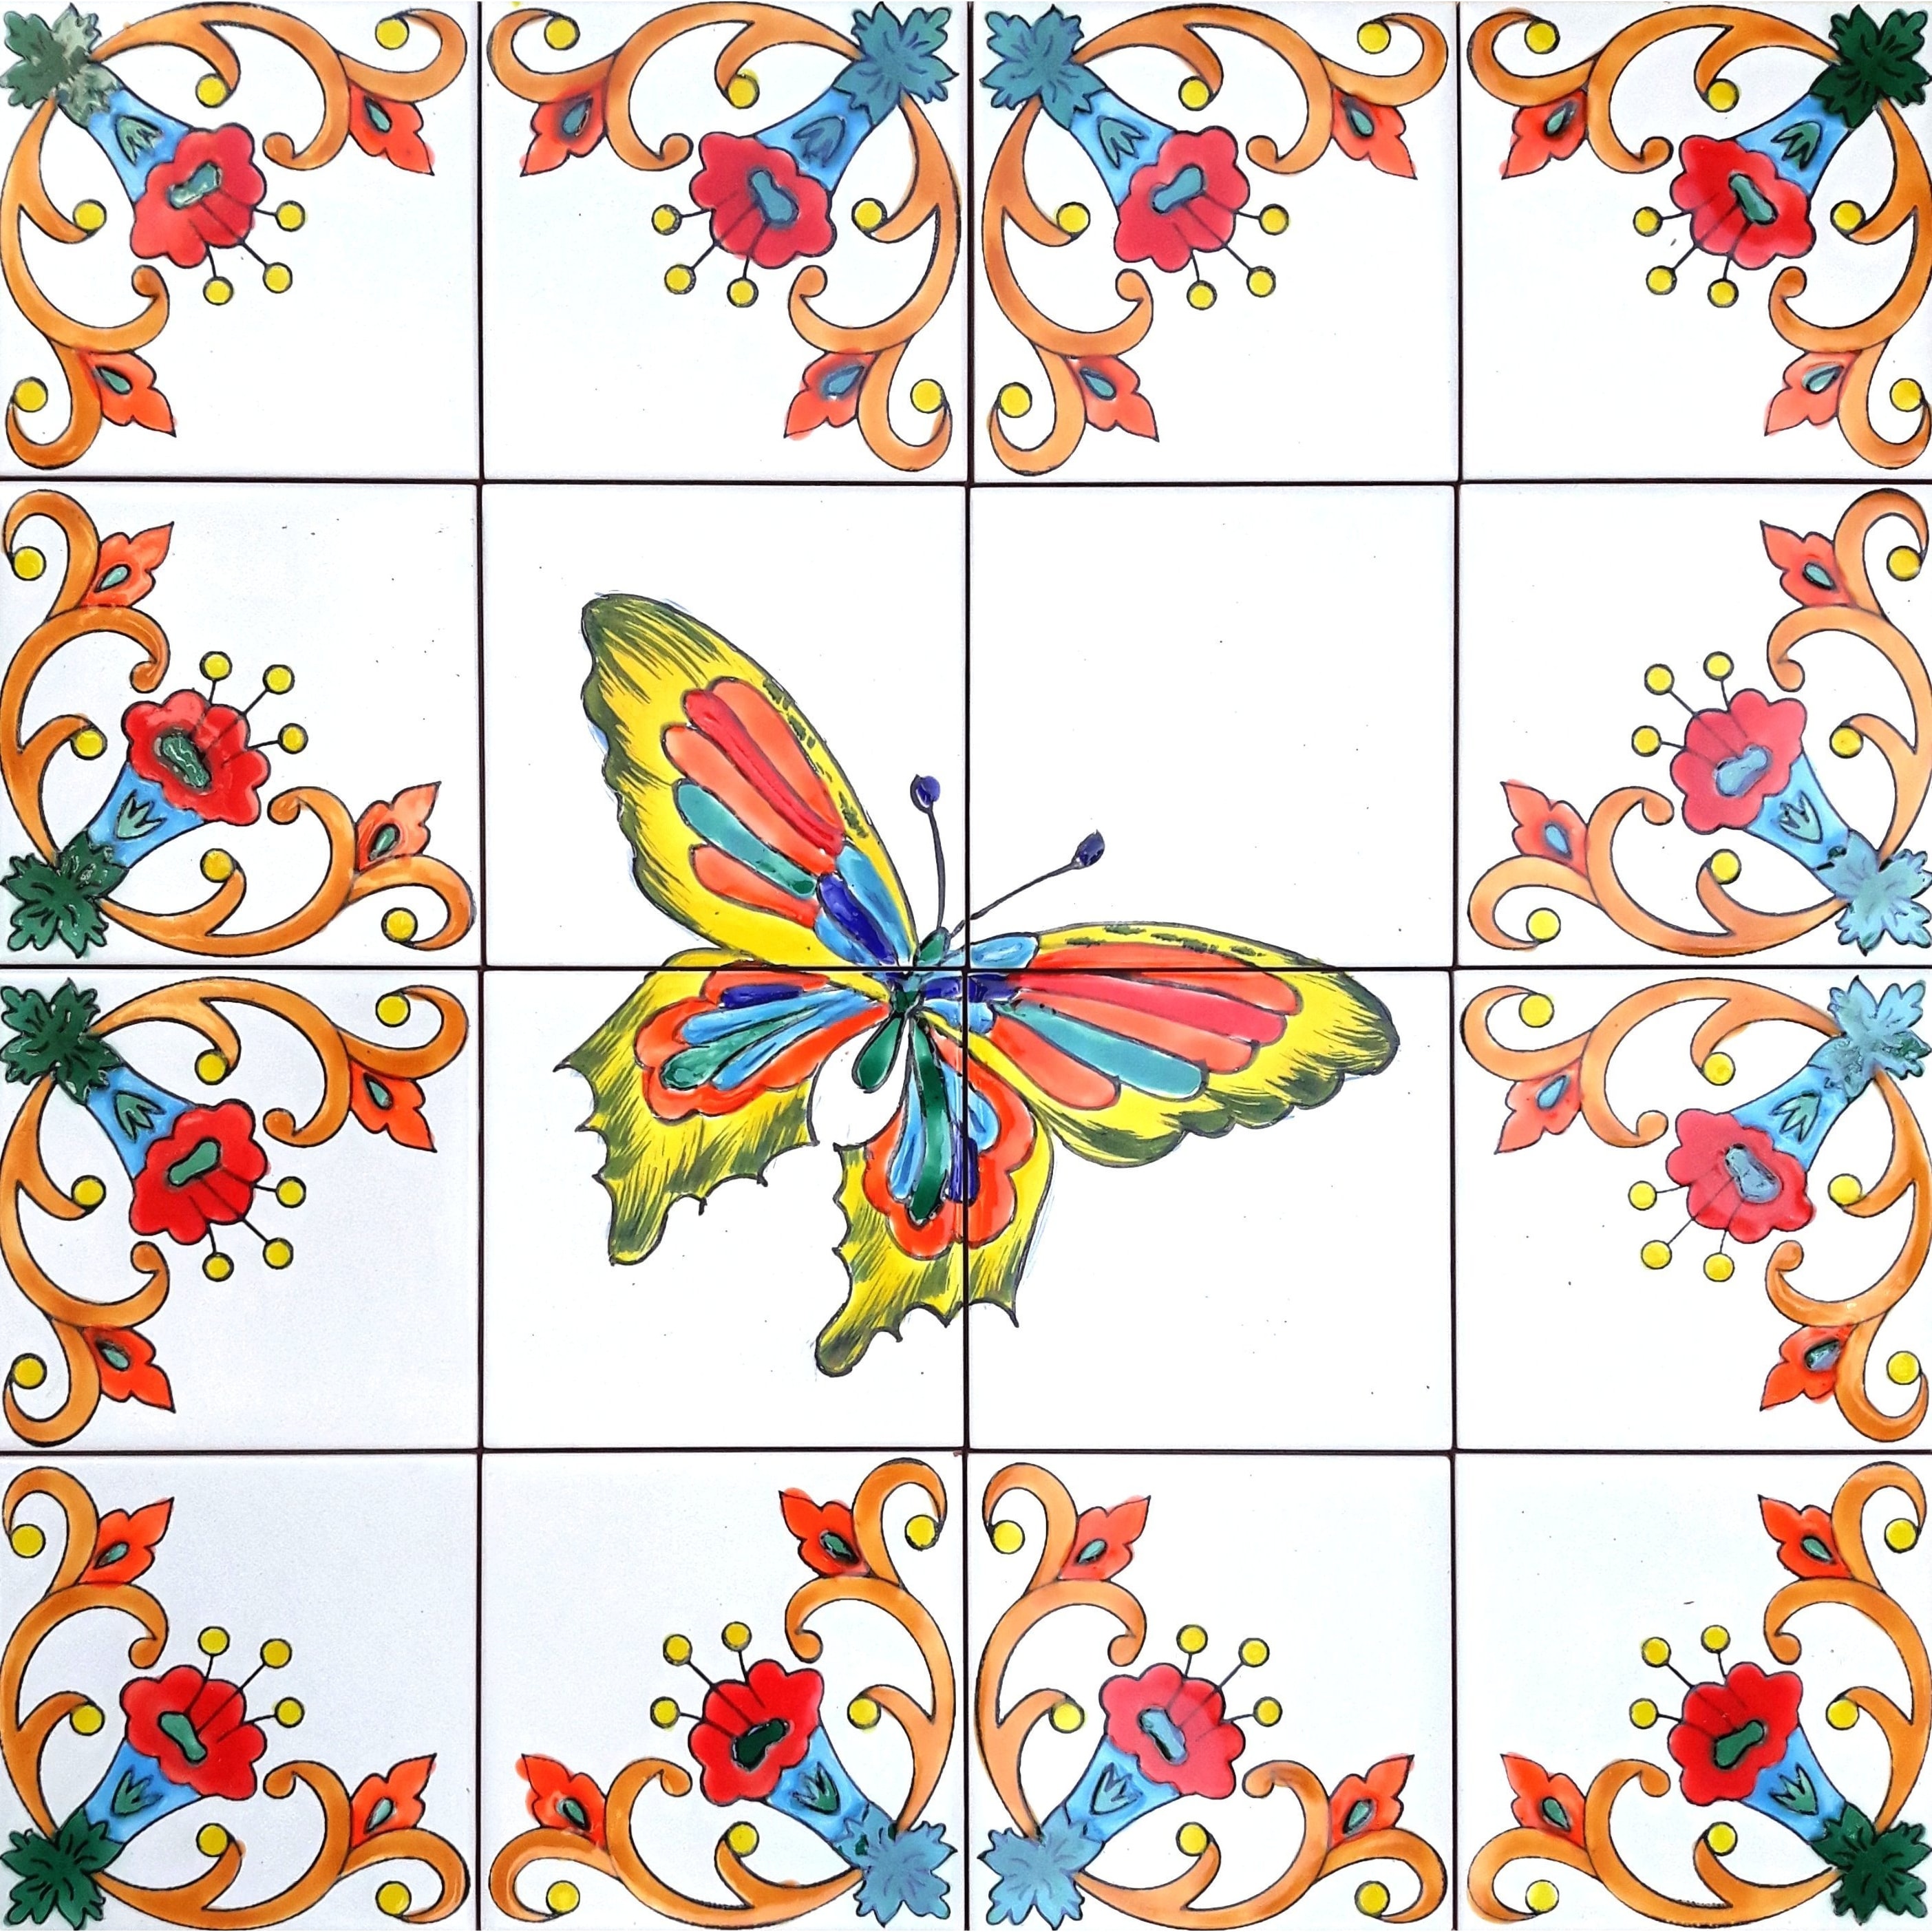 16in x 16in Butterfly Decor Accent Mosaic Wall Mural 16 Ceramic Tiles Bed  Bath  Beyond 33777677